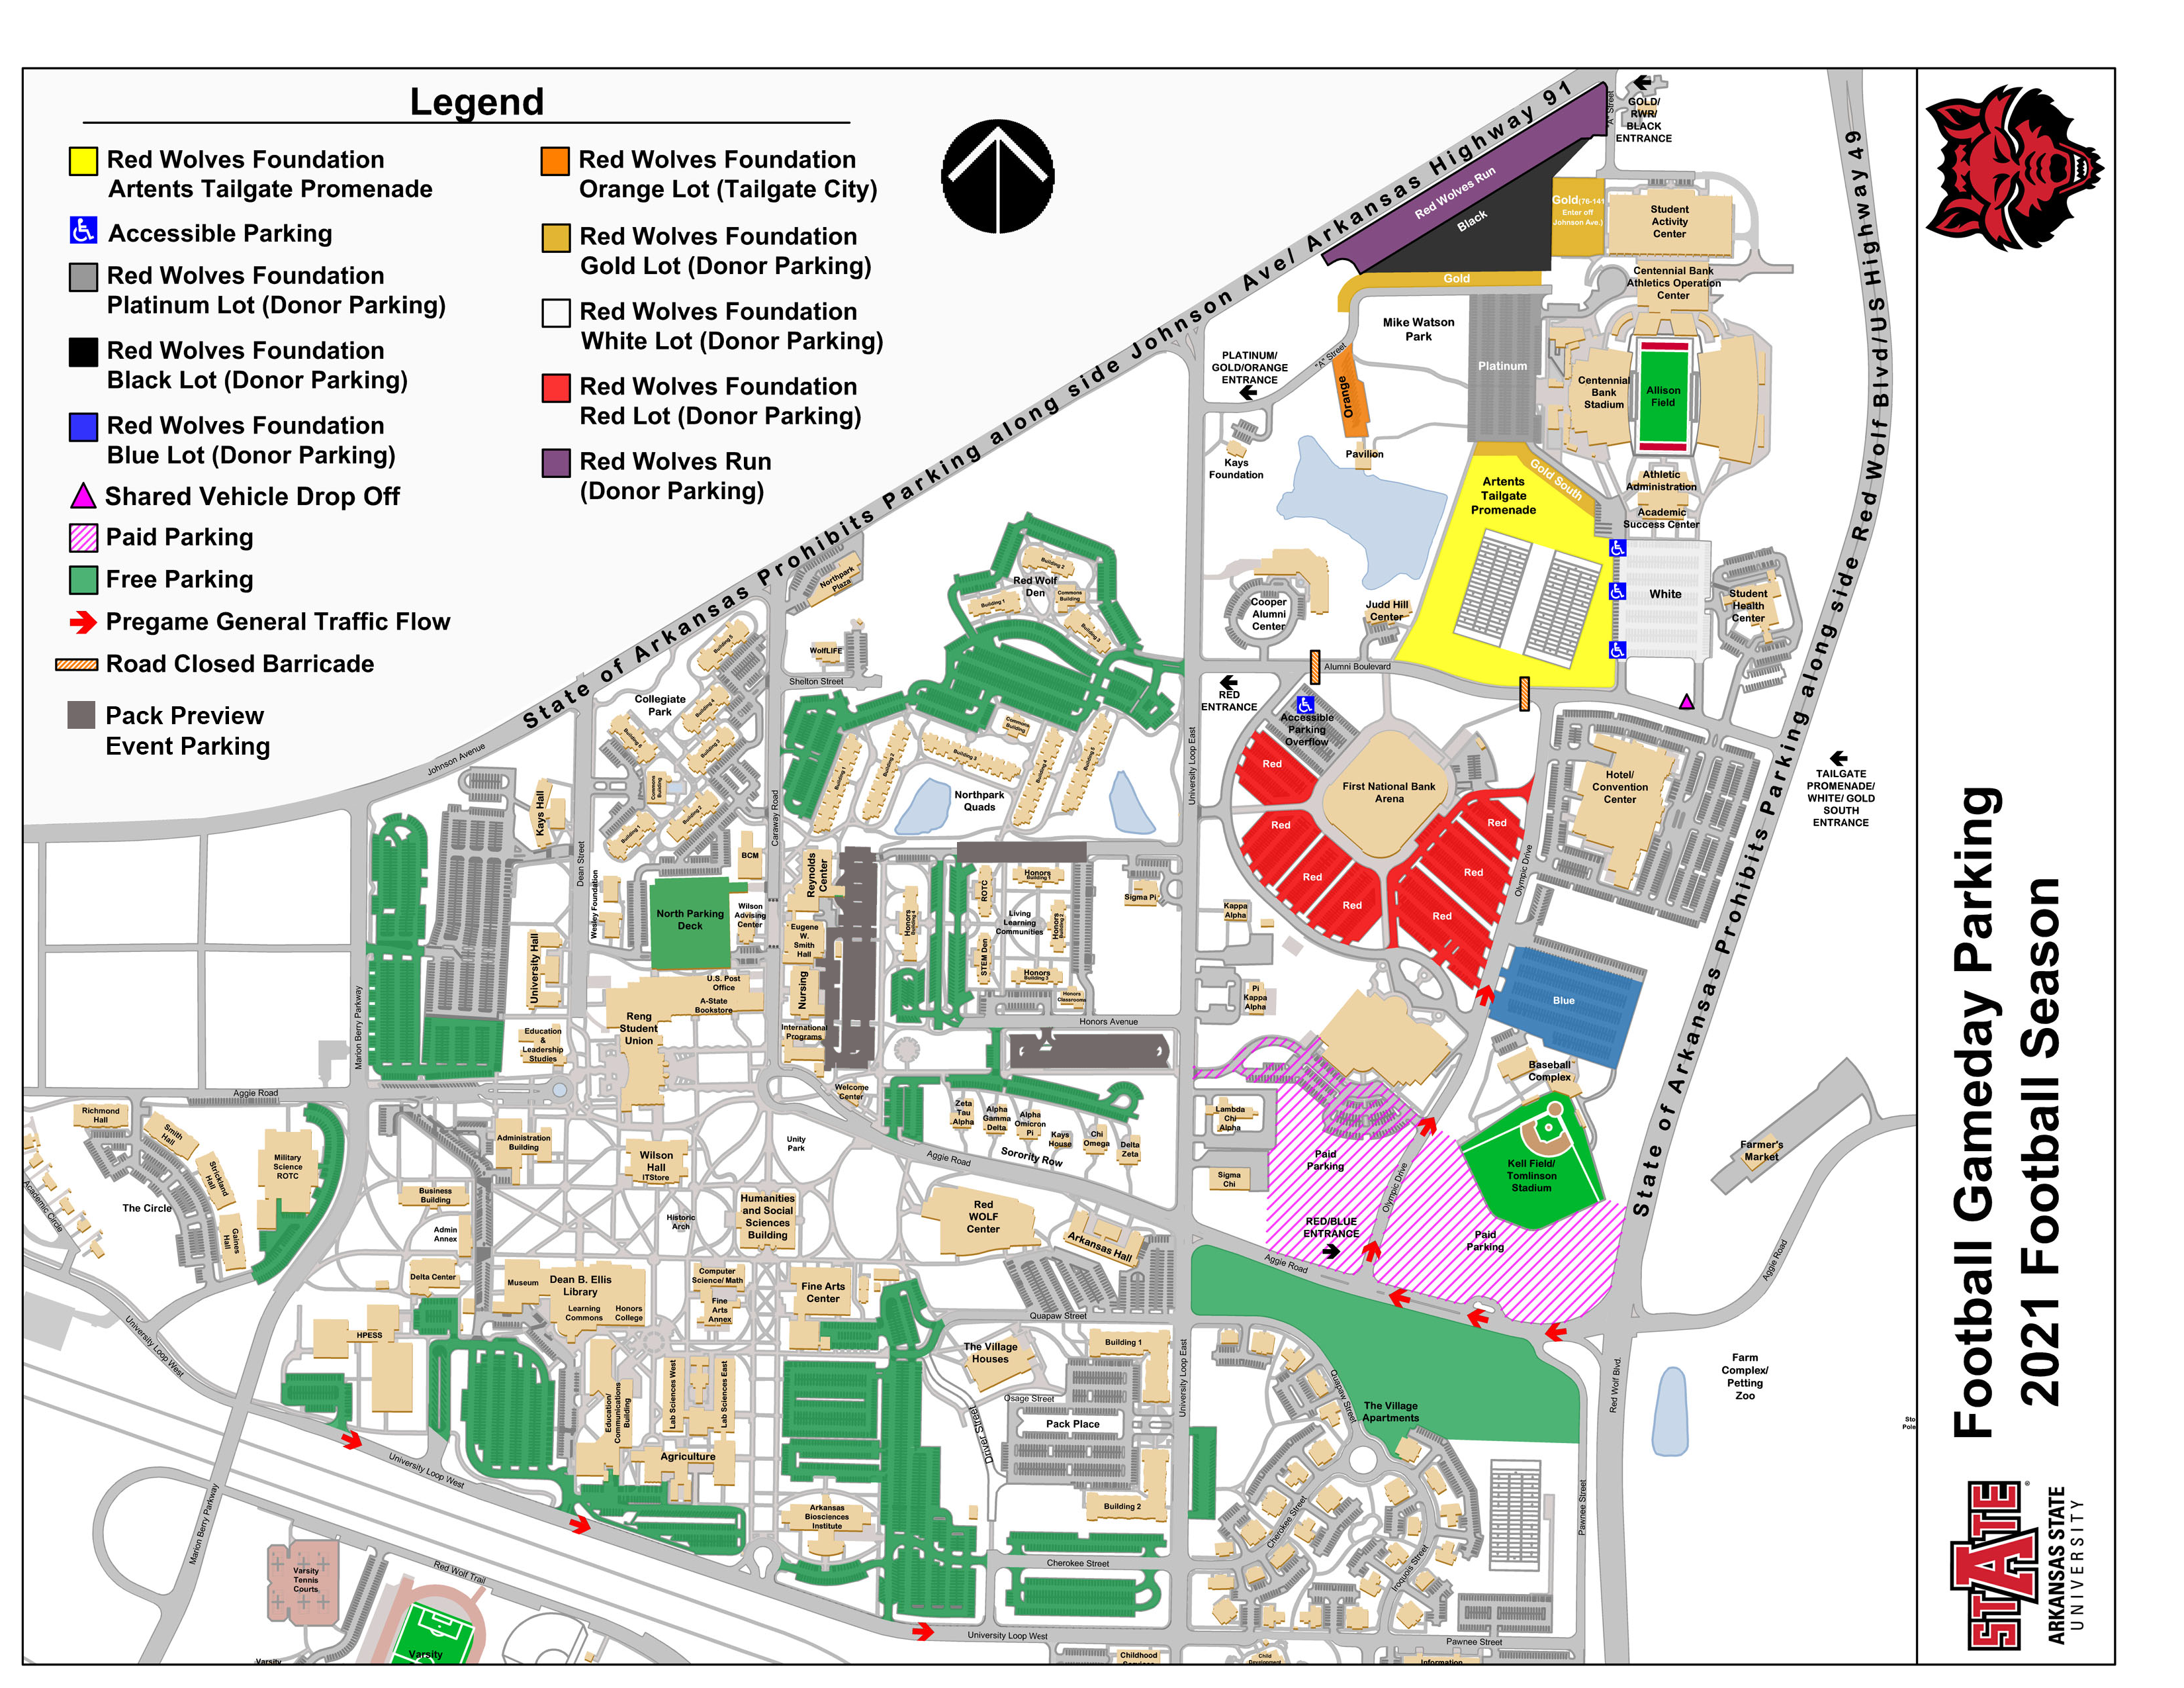 A campus map highlighting surface parking options